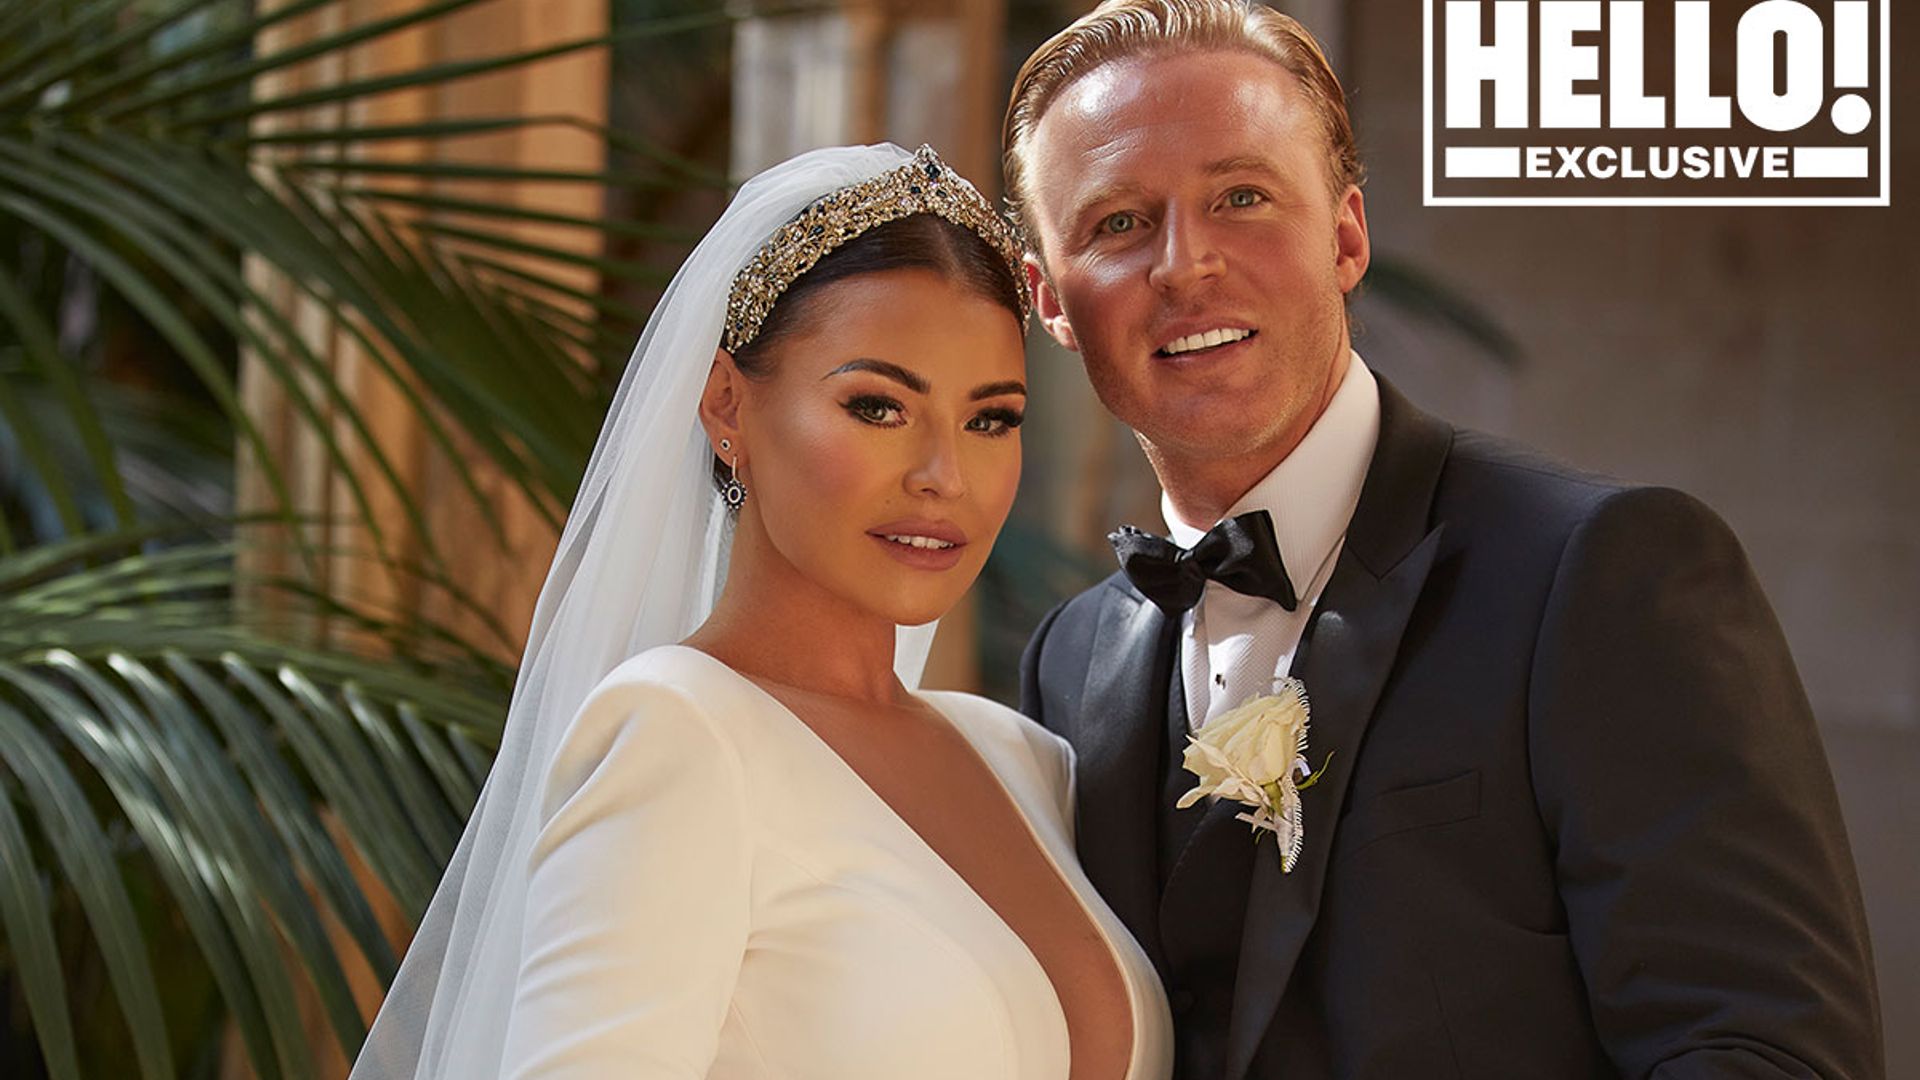 jessica wright wedding pictures exclusive